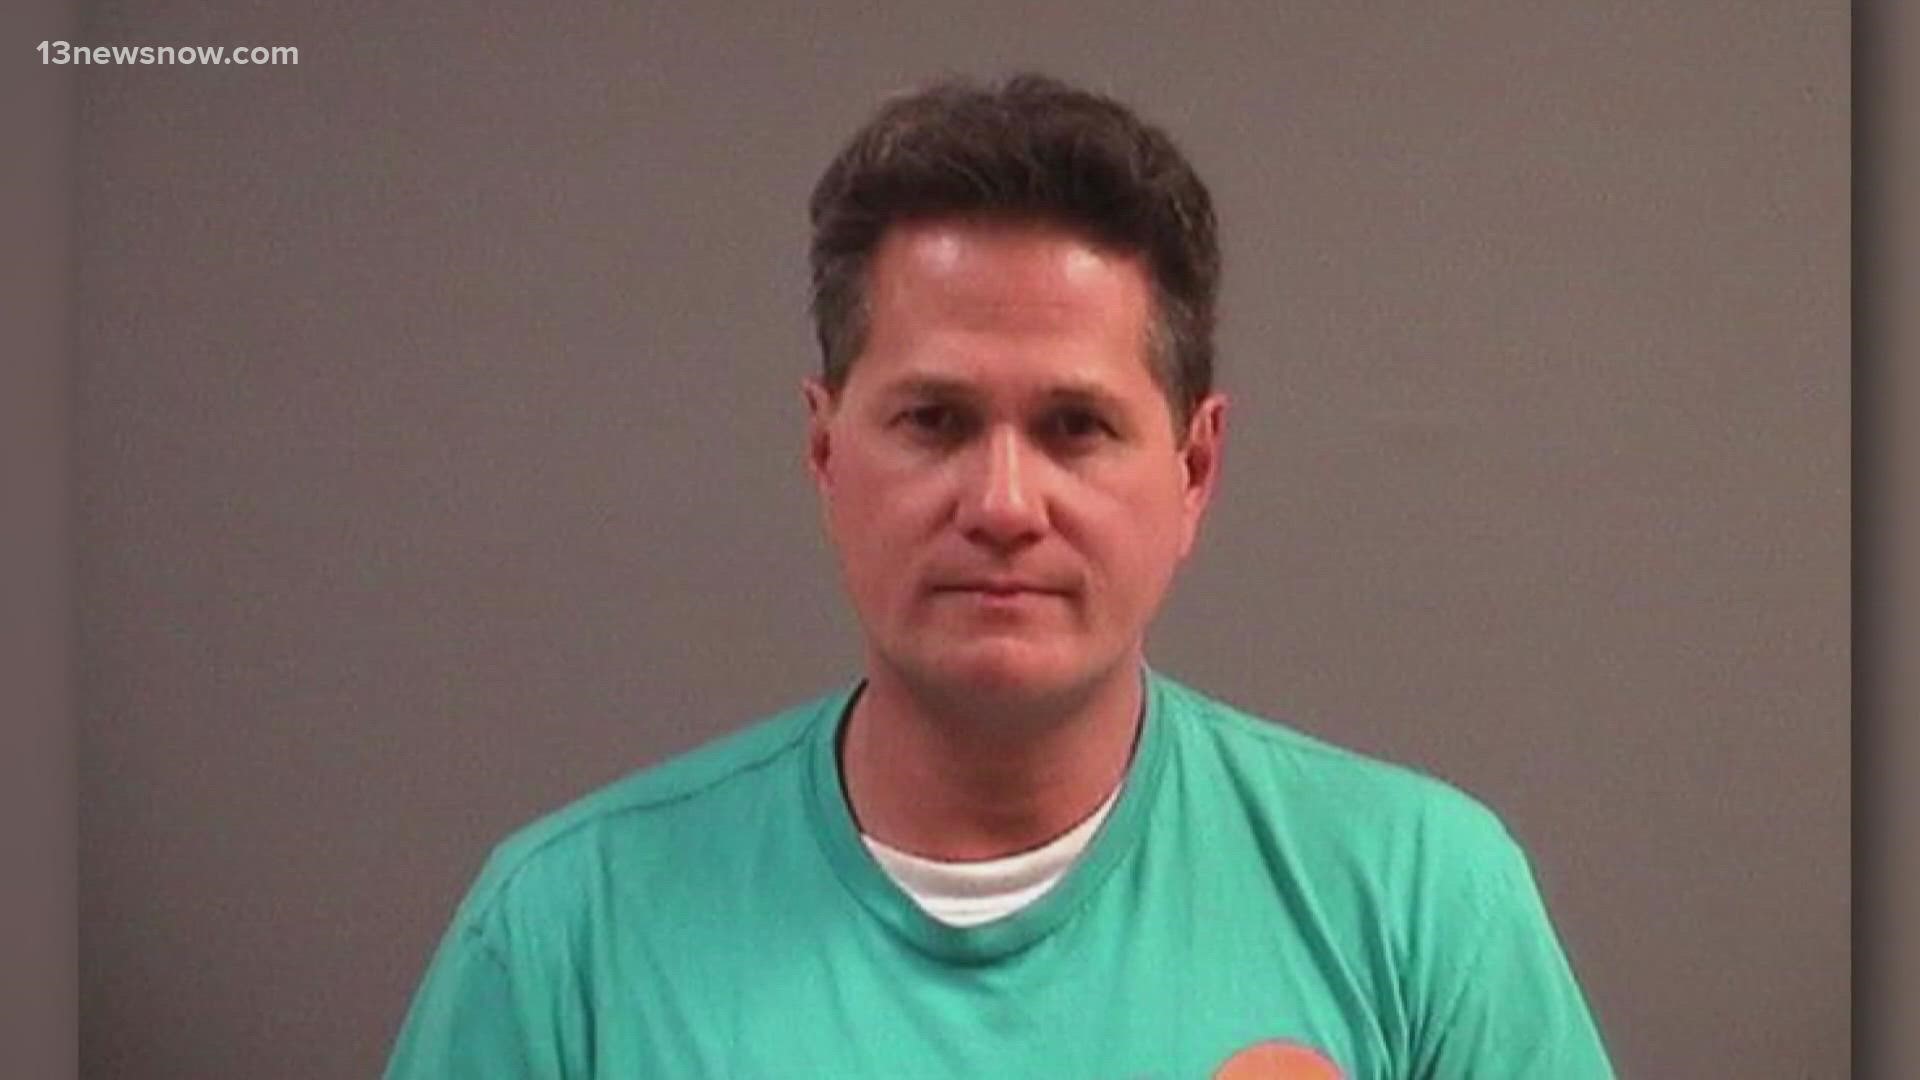 Virginia Beach Rock Church Pastor John Blanchard appeared in court on prostitution charges from his October arrest.